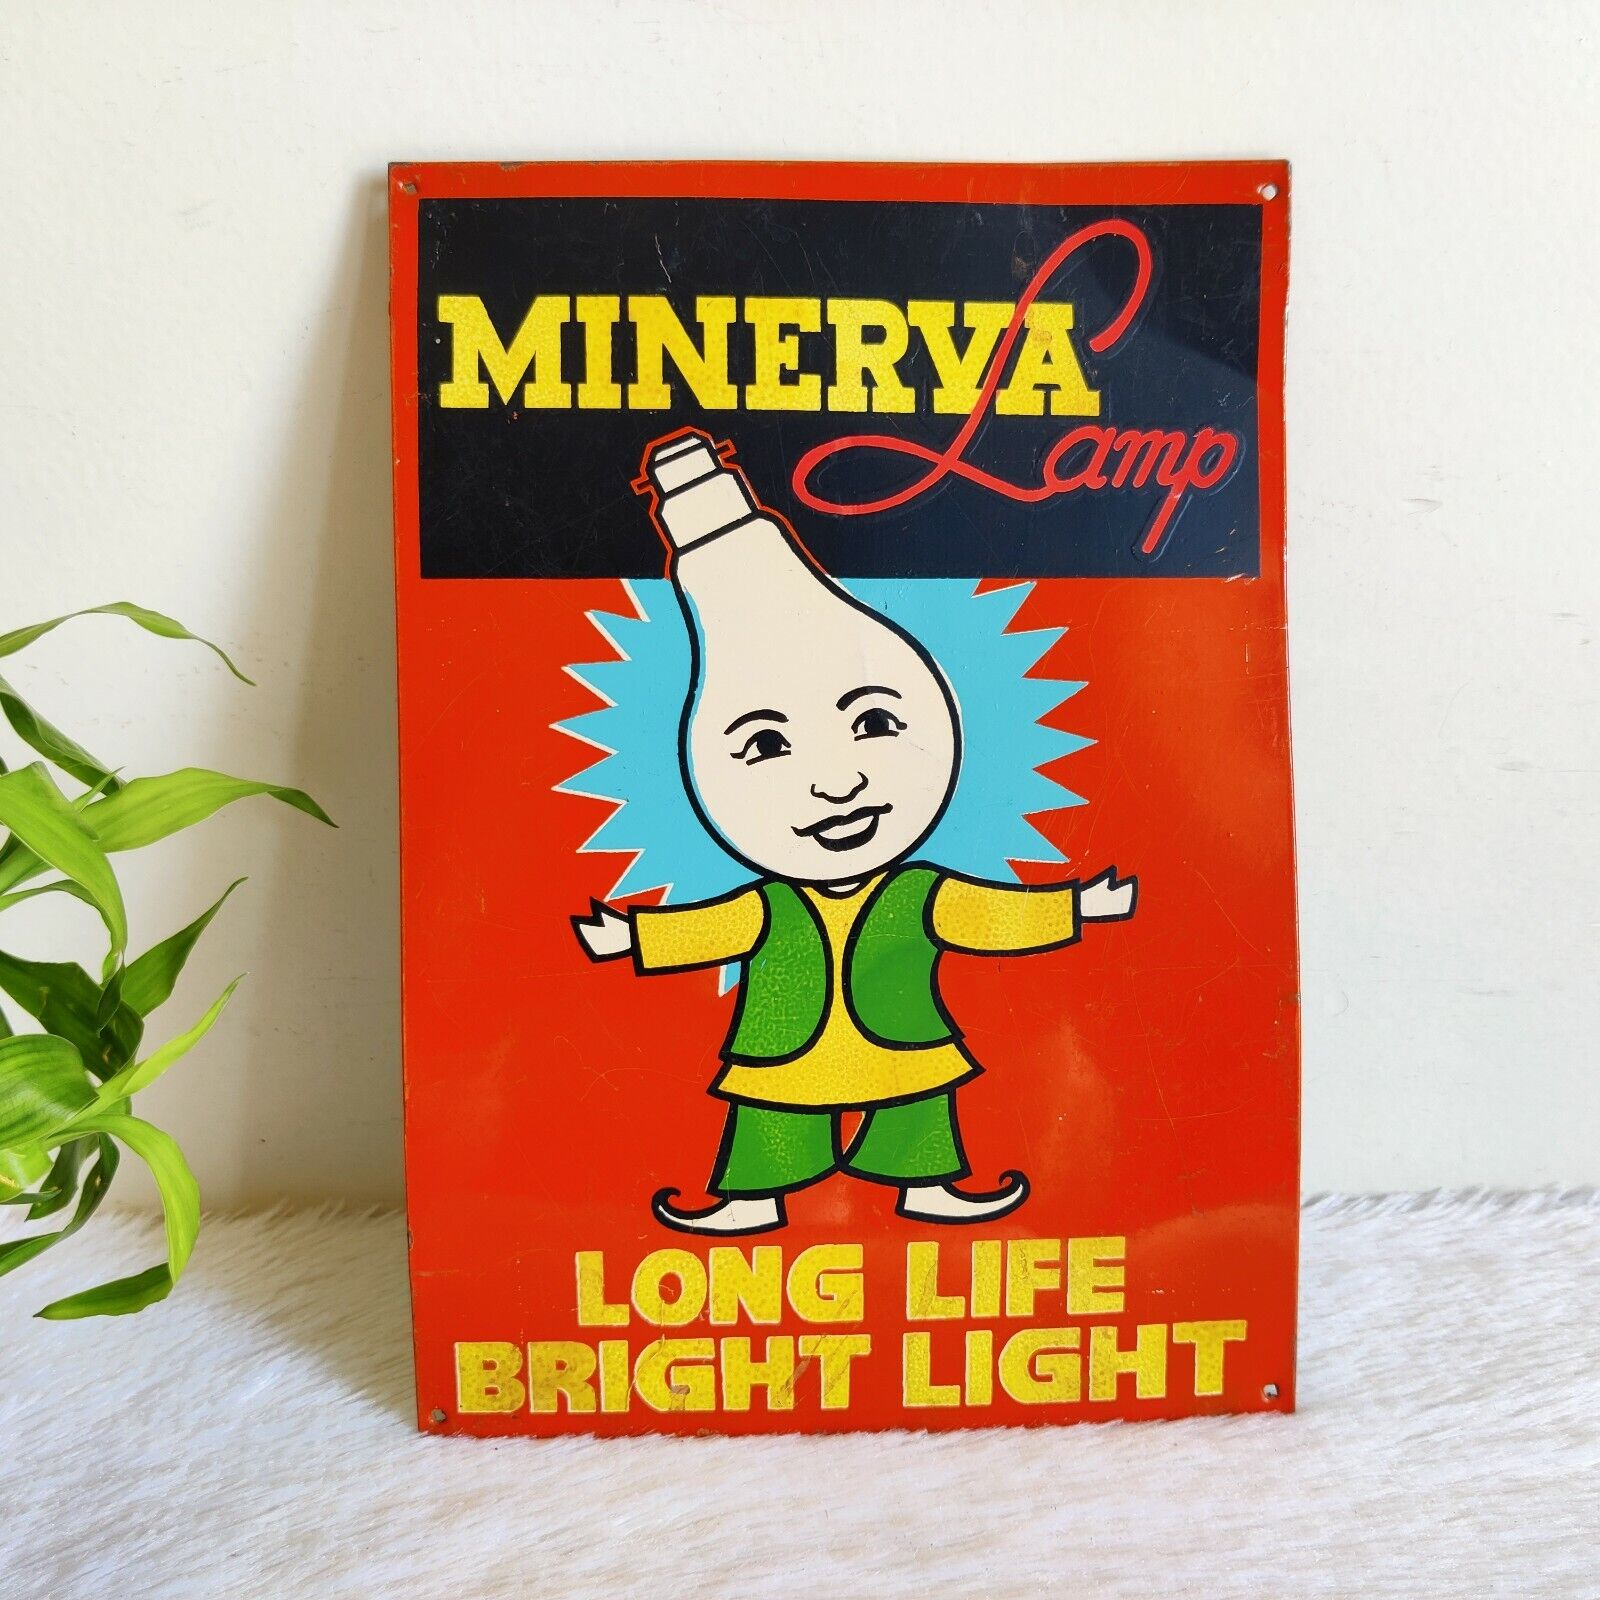 1950Vintage Minerva Lamp Advertising Tin Sign Board Decorative Collectible TS421